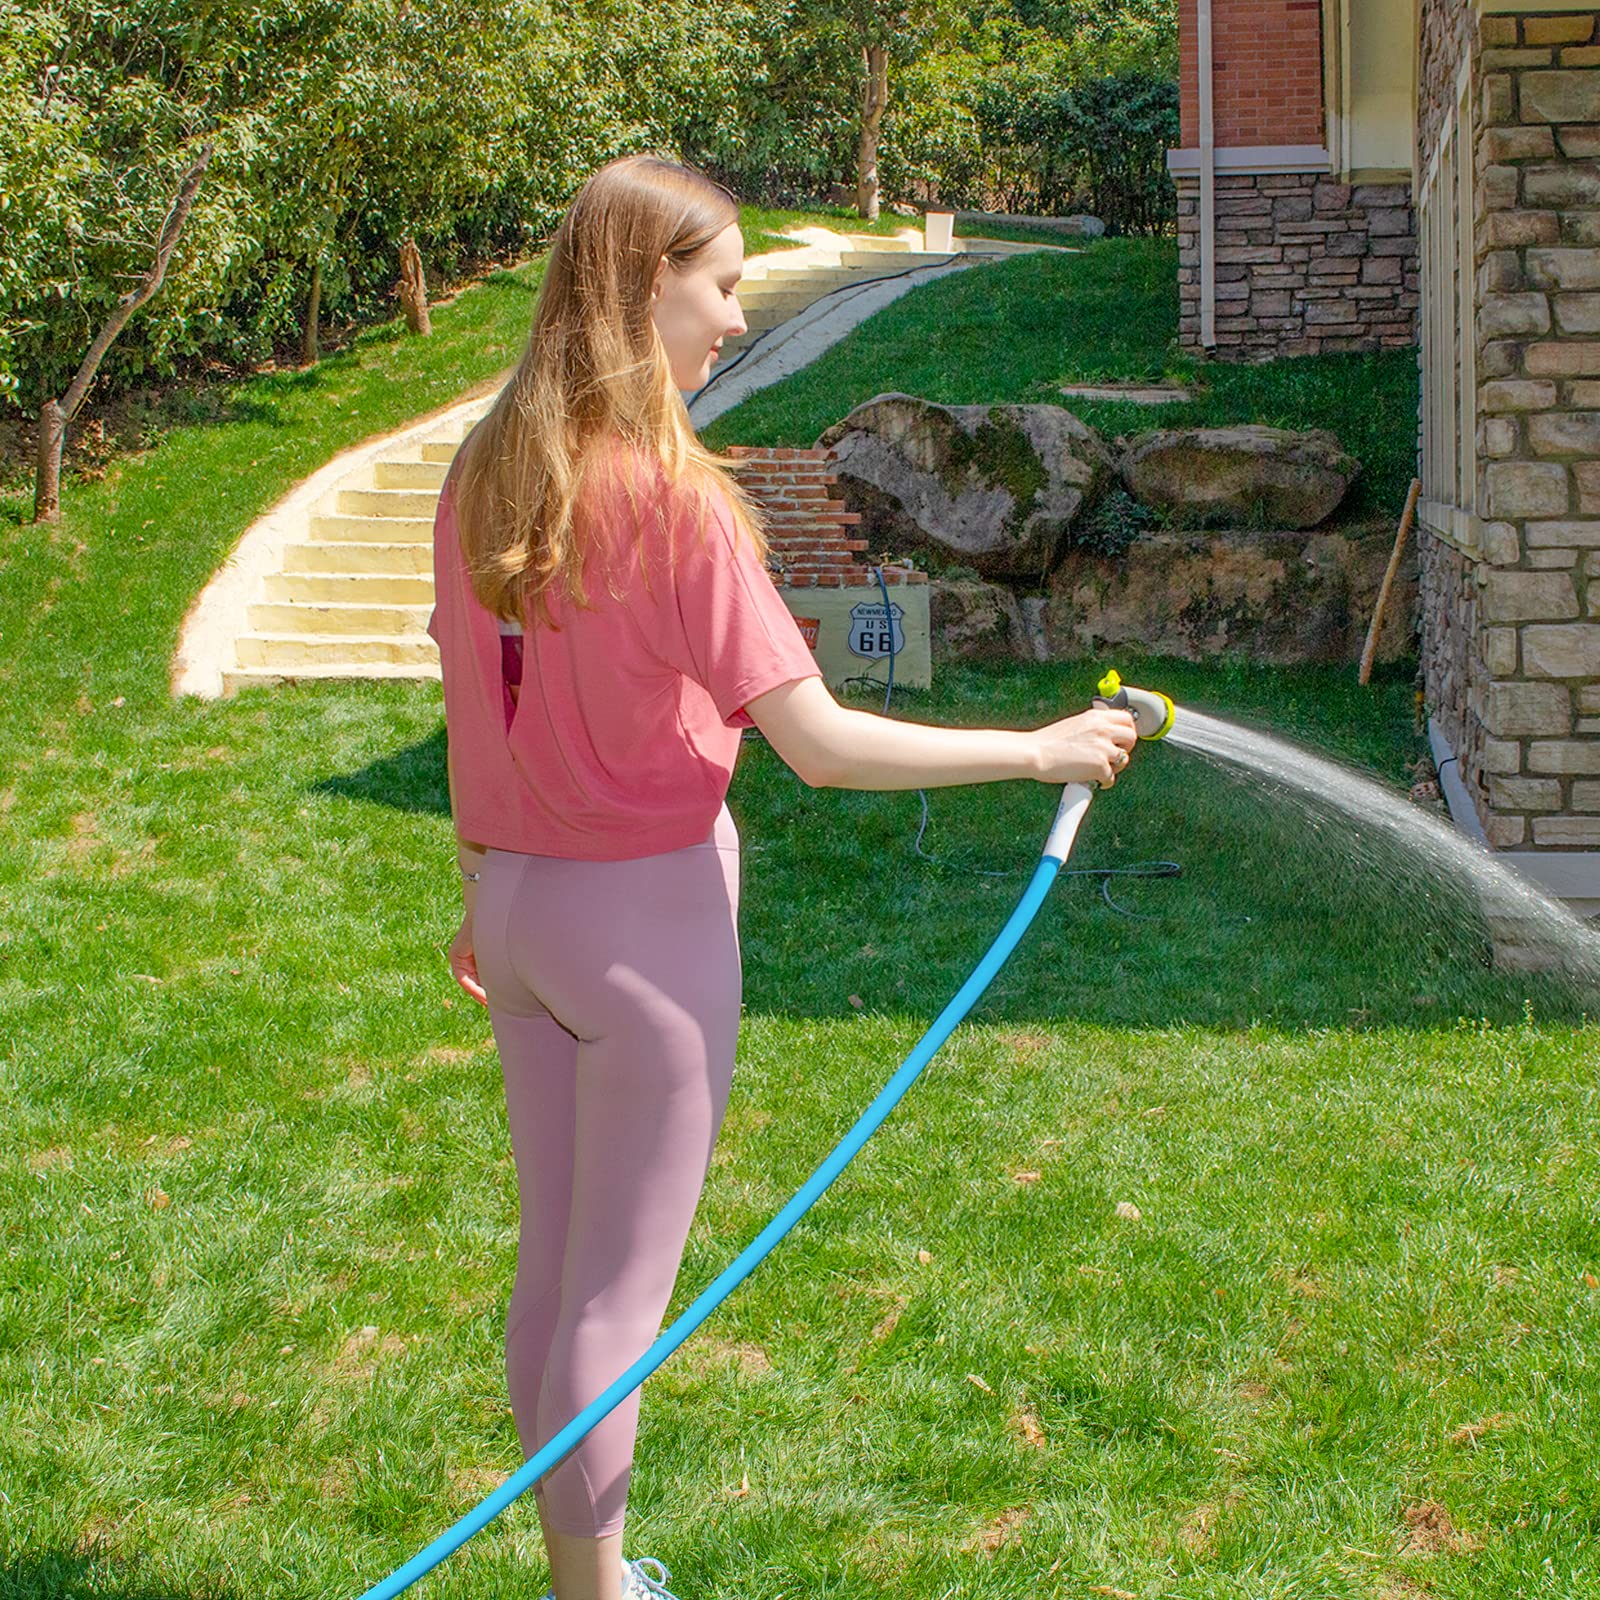 Fevone Garden Hose 100 ft x 5/8", Drinking Water Safe, Heavy Duty Water Hose, Flexible and Lightweight, Hybrid Hose Kink Free, Easy to Coil, Solid Aluminum Fittings - No Leak